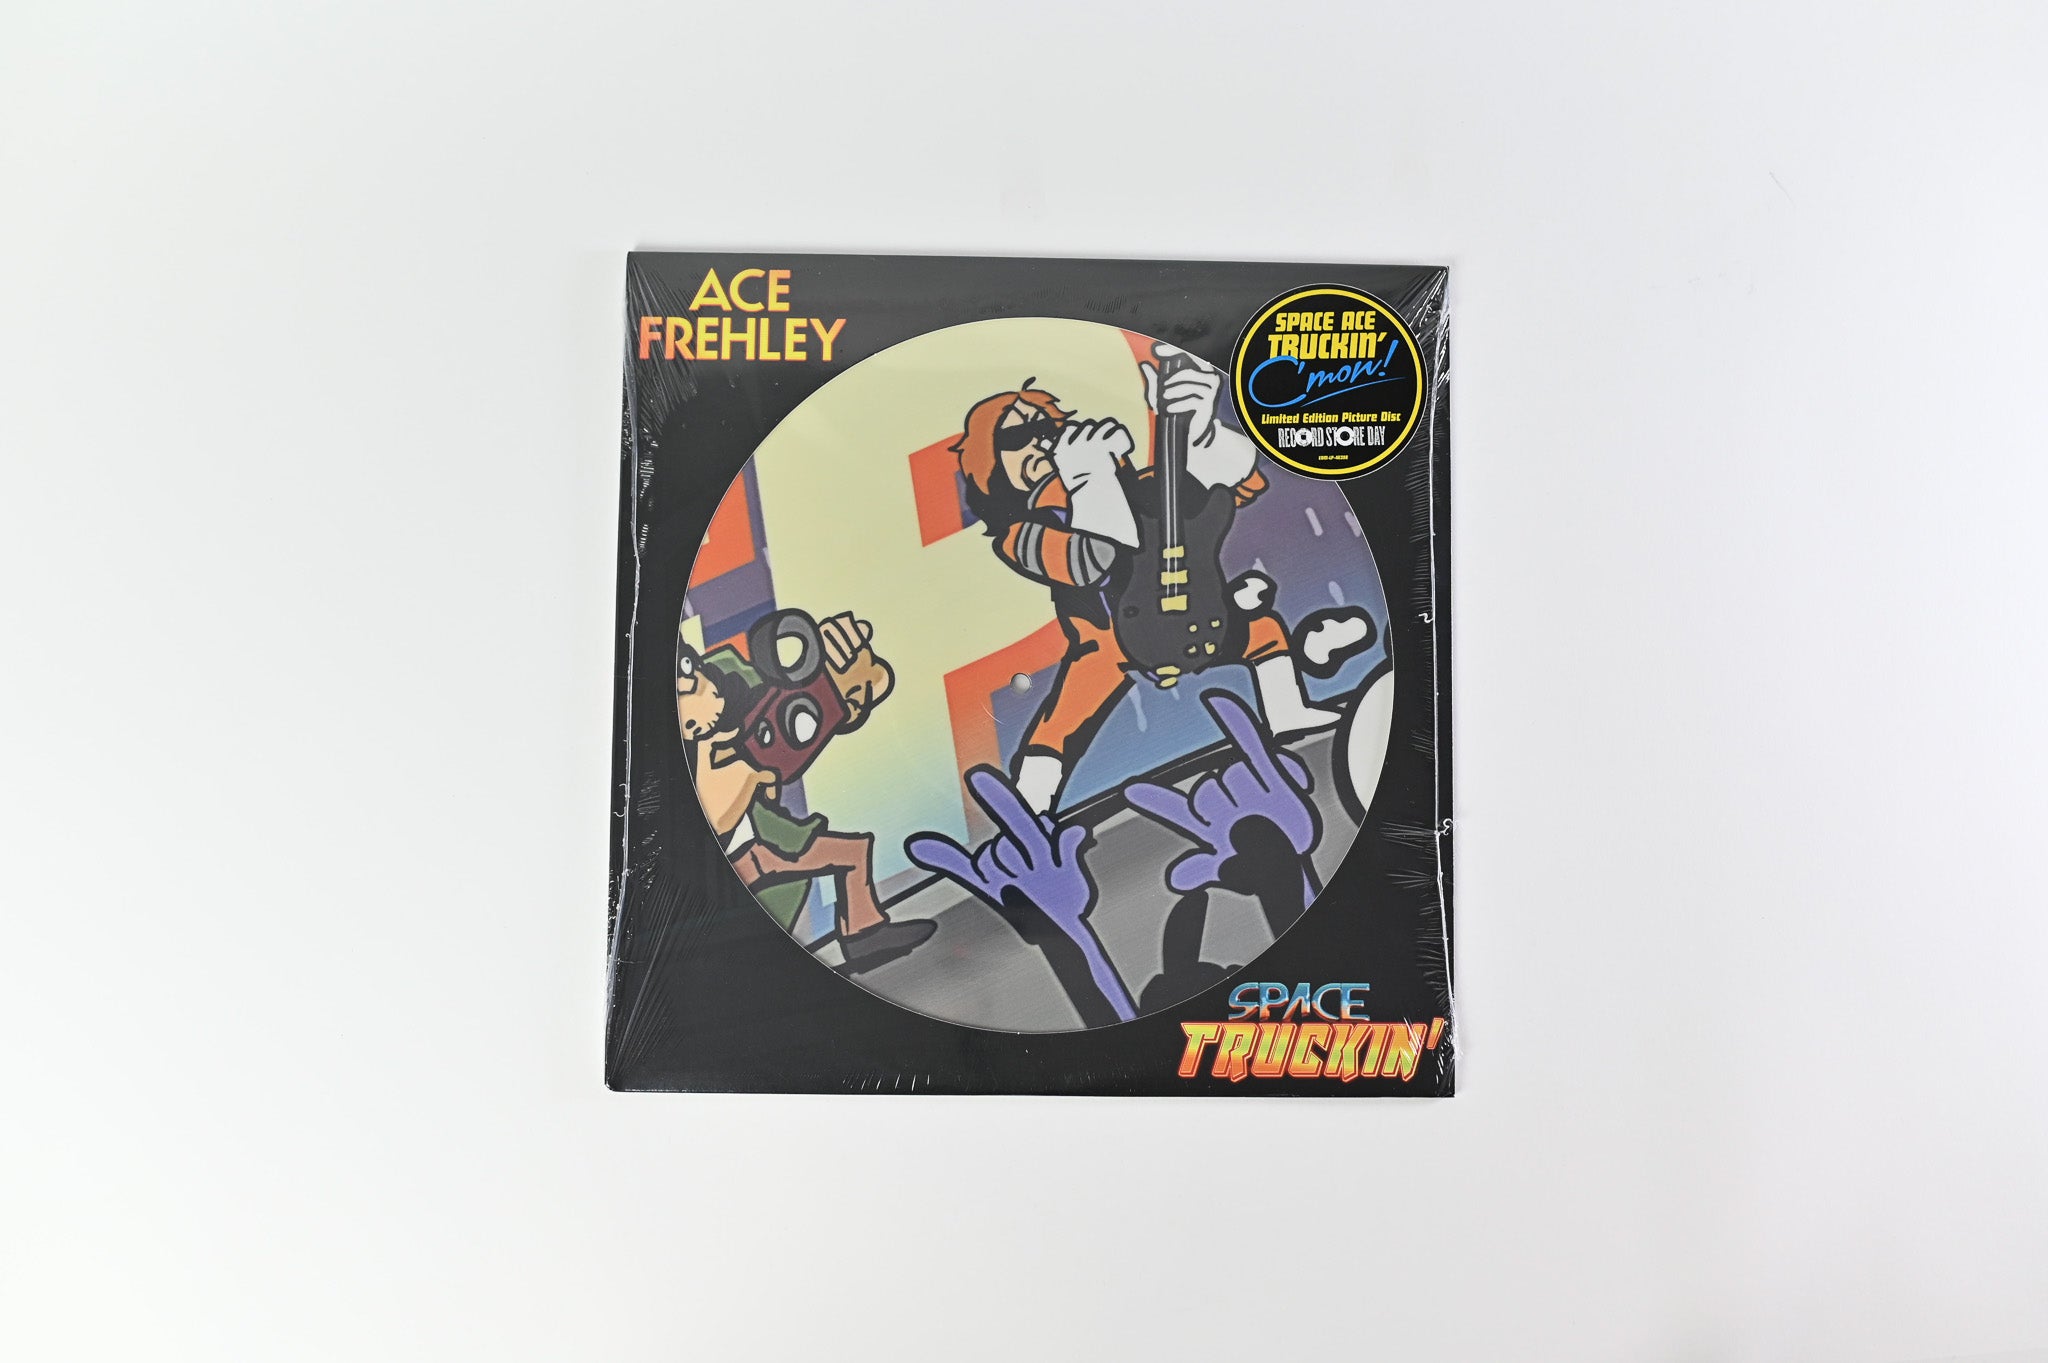 Ace Frehley - Space Truckin' SEALED RSD Picture Disc on eOne 45 RPM